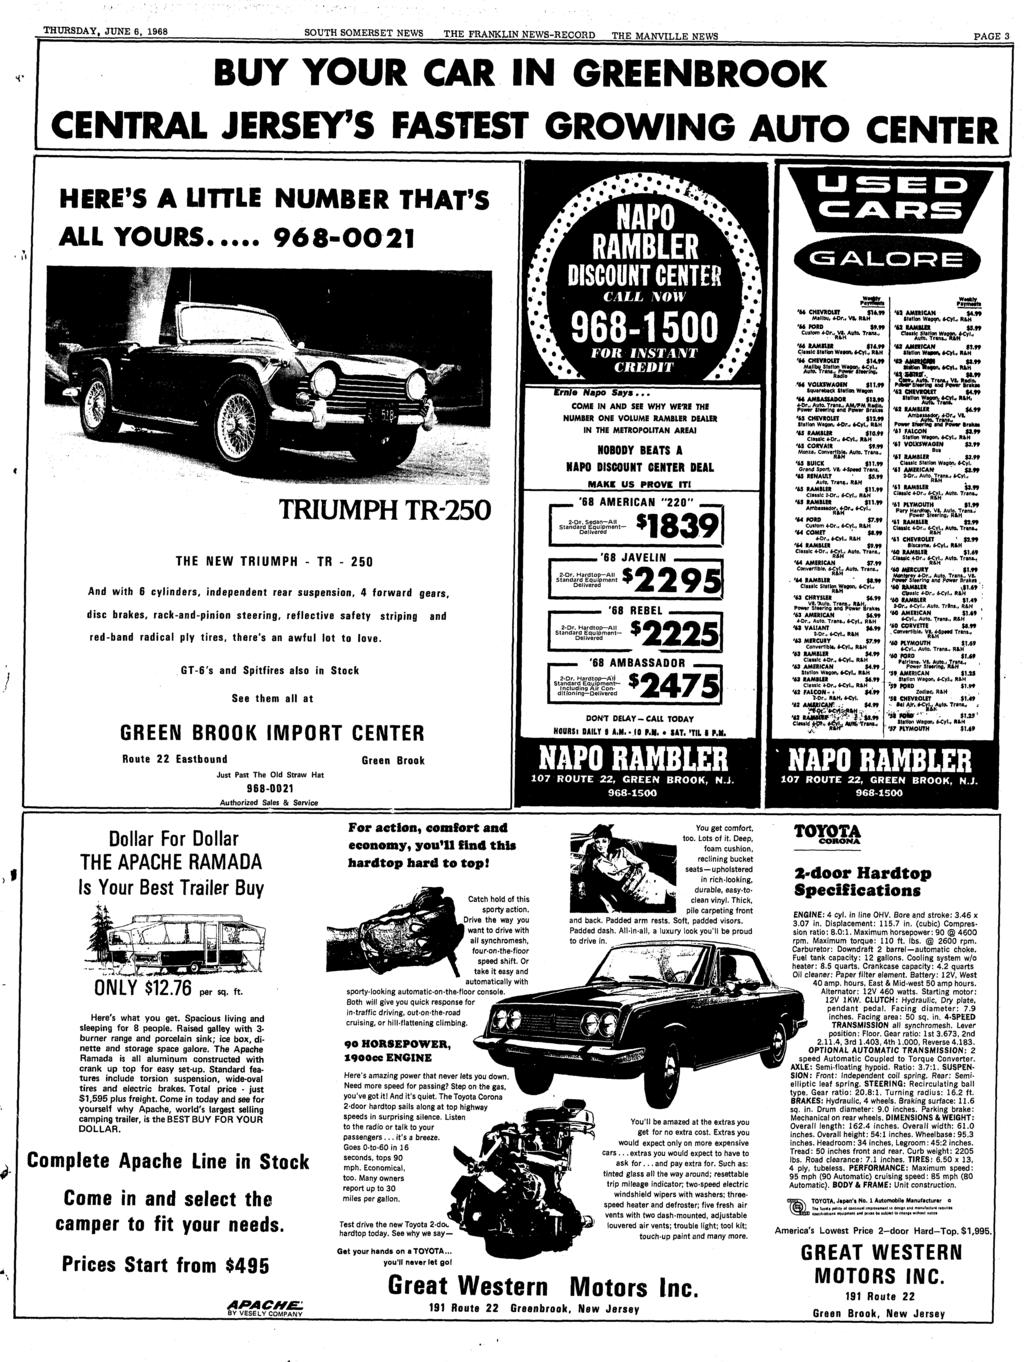 THURSDAY D JUNE 6, 1968 SOUTH SOMERSET NEWS THE FRANKLN NEWS-RECORD TH,E MANVLLE NEWS PAGE 3, BUY YOUR CAR N GRE NBROOK am 1 C!